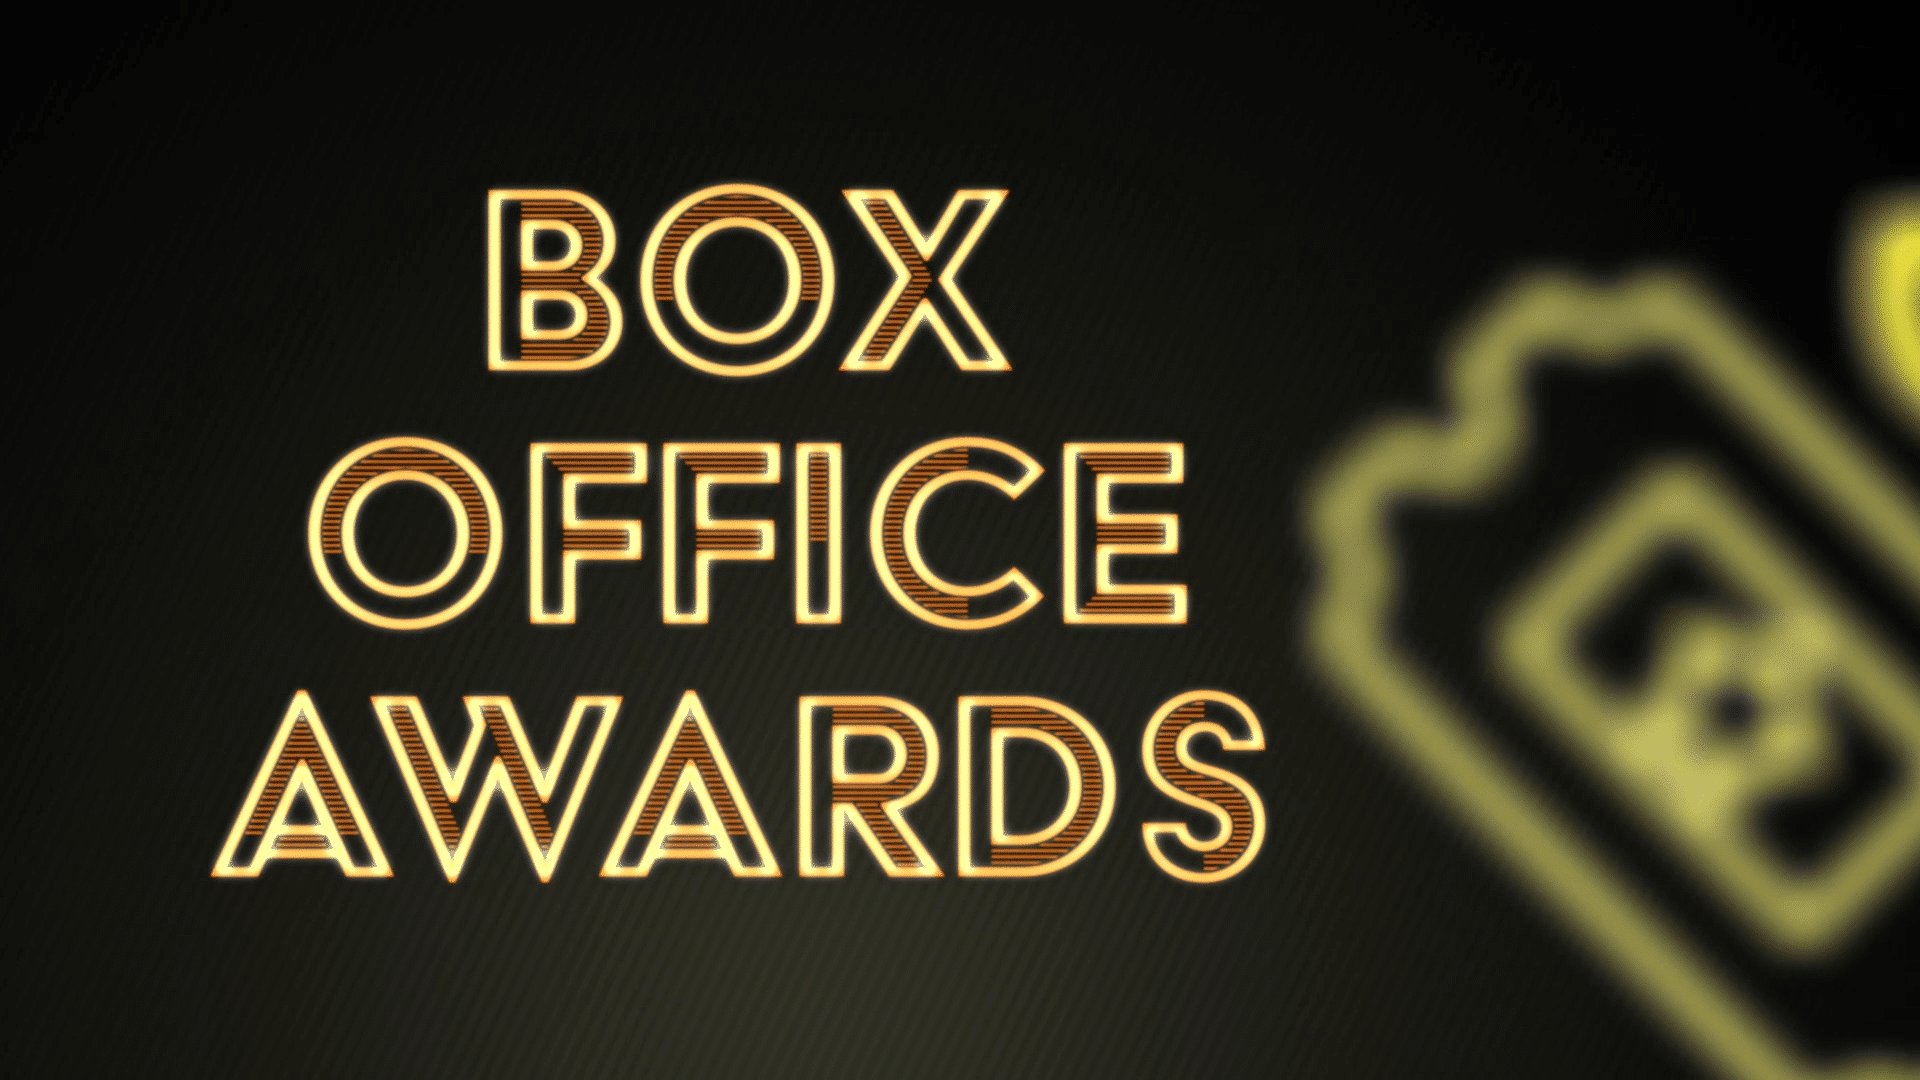 awards video for a conference - box office awards image